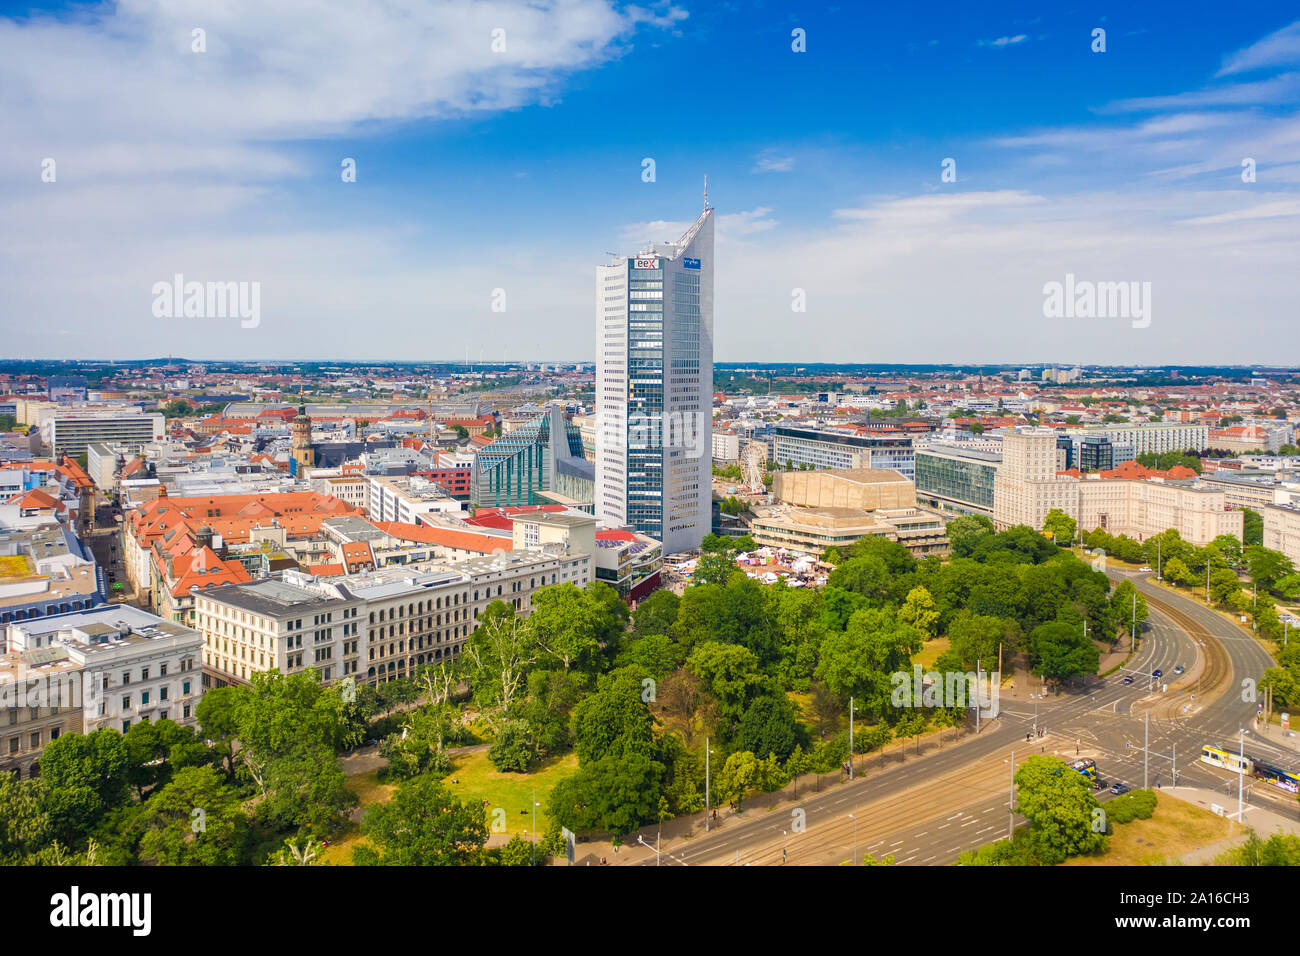 High angle view of City-Hochhaus in Leipzig cityscape against cloudy sky Stock Photo